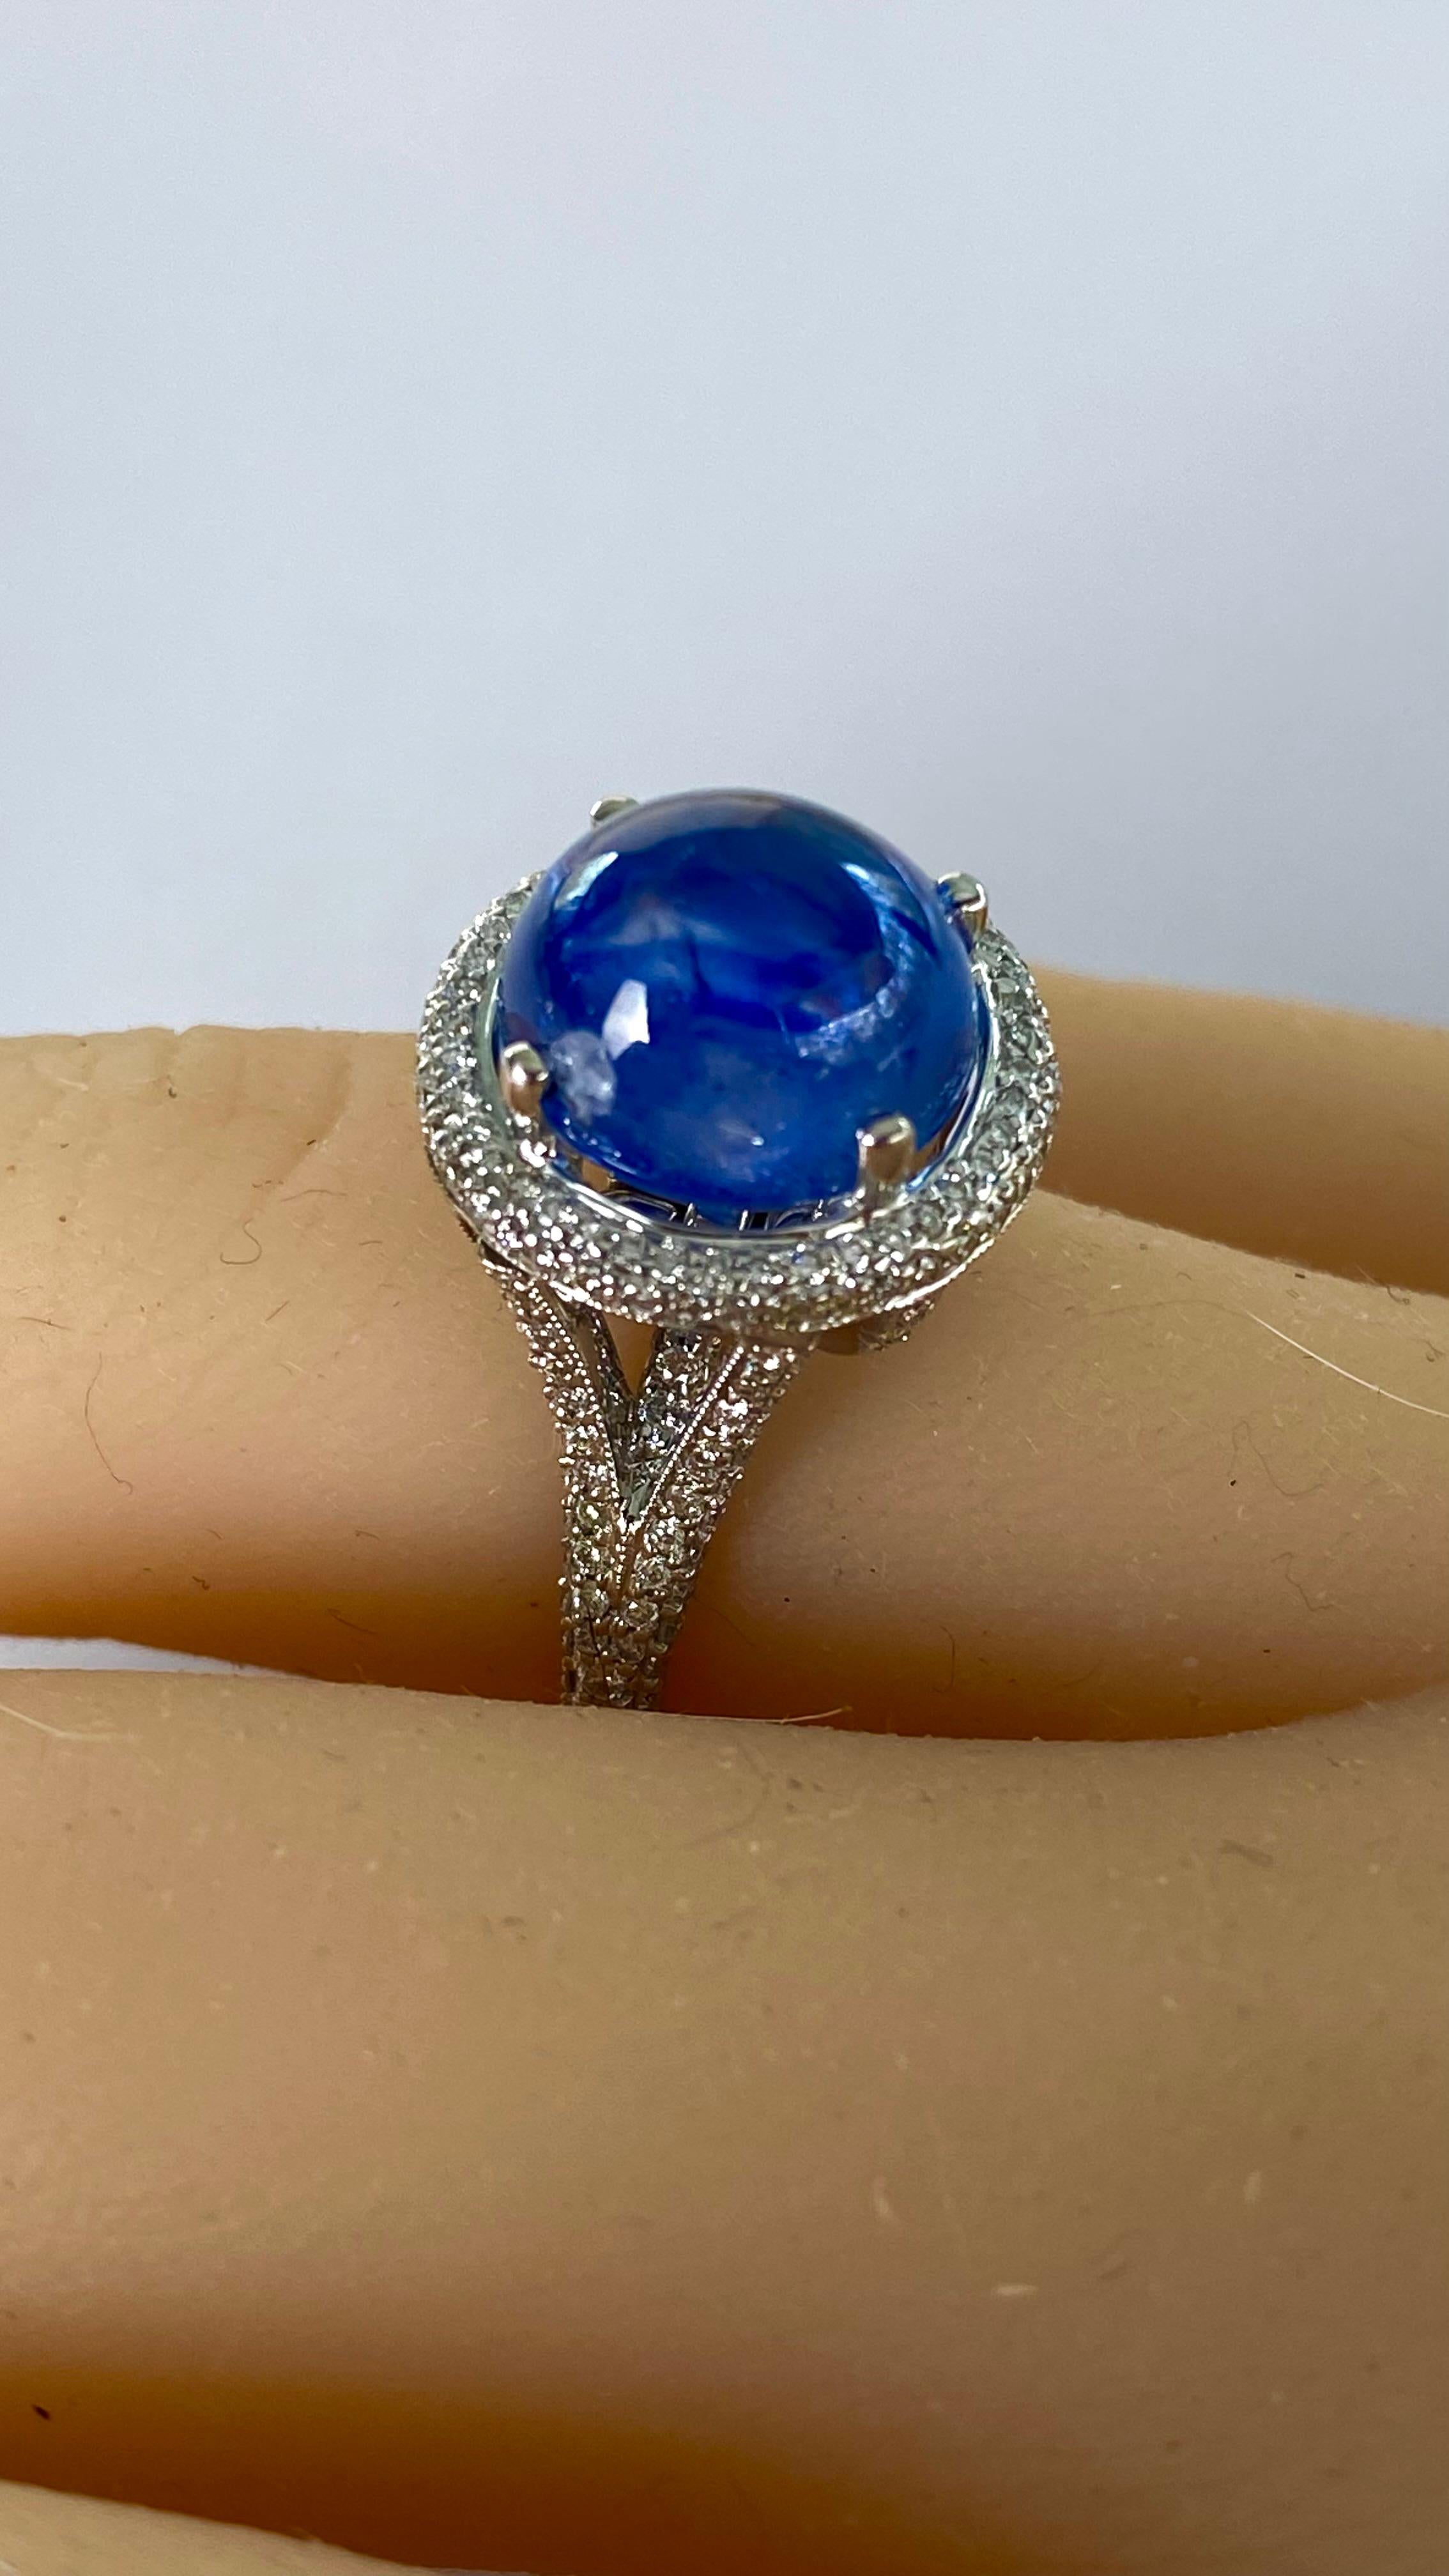 Introducing our exquisite 18 Karat White Gold Vintage Cocktail Ring, a timeless piece that exudes elegance and sophistication. At its heart lies a captivating Ceylon Cabochon Sapphire, weighing a substantial 8.33 carats. This mesmerizing center